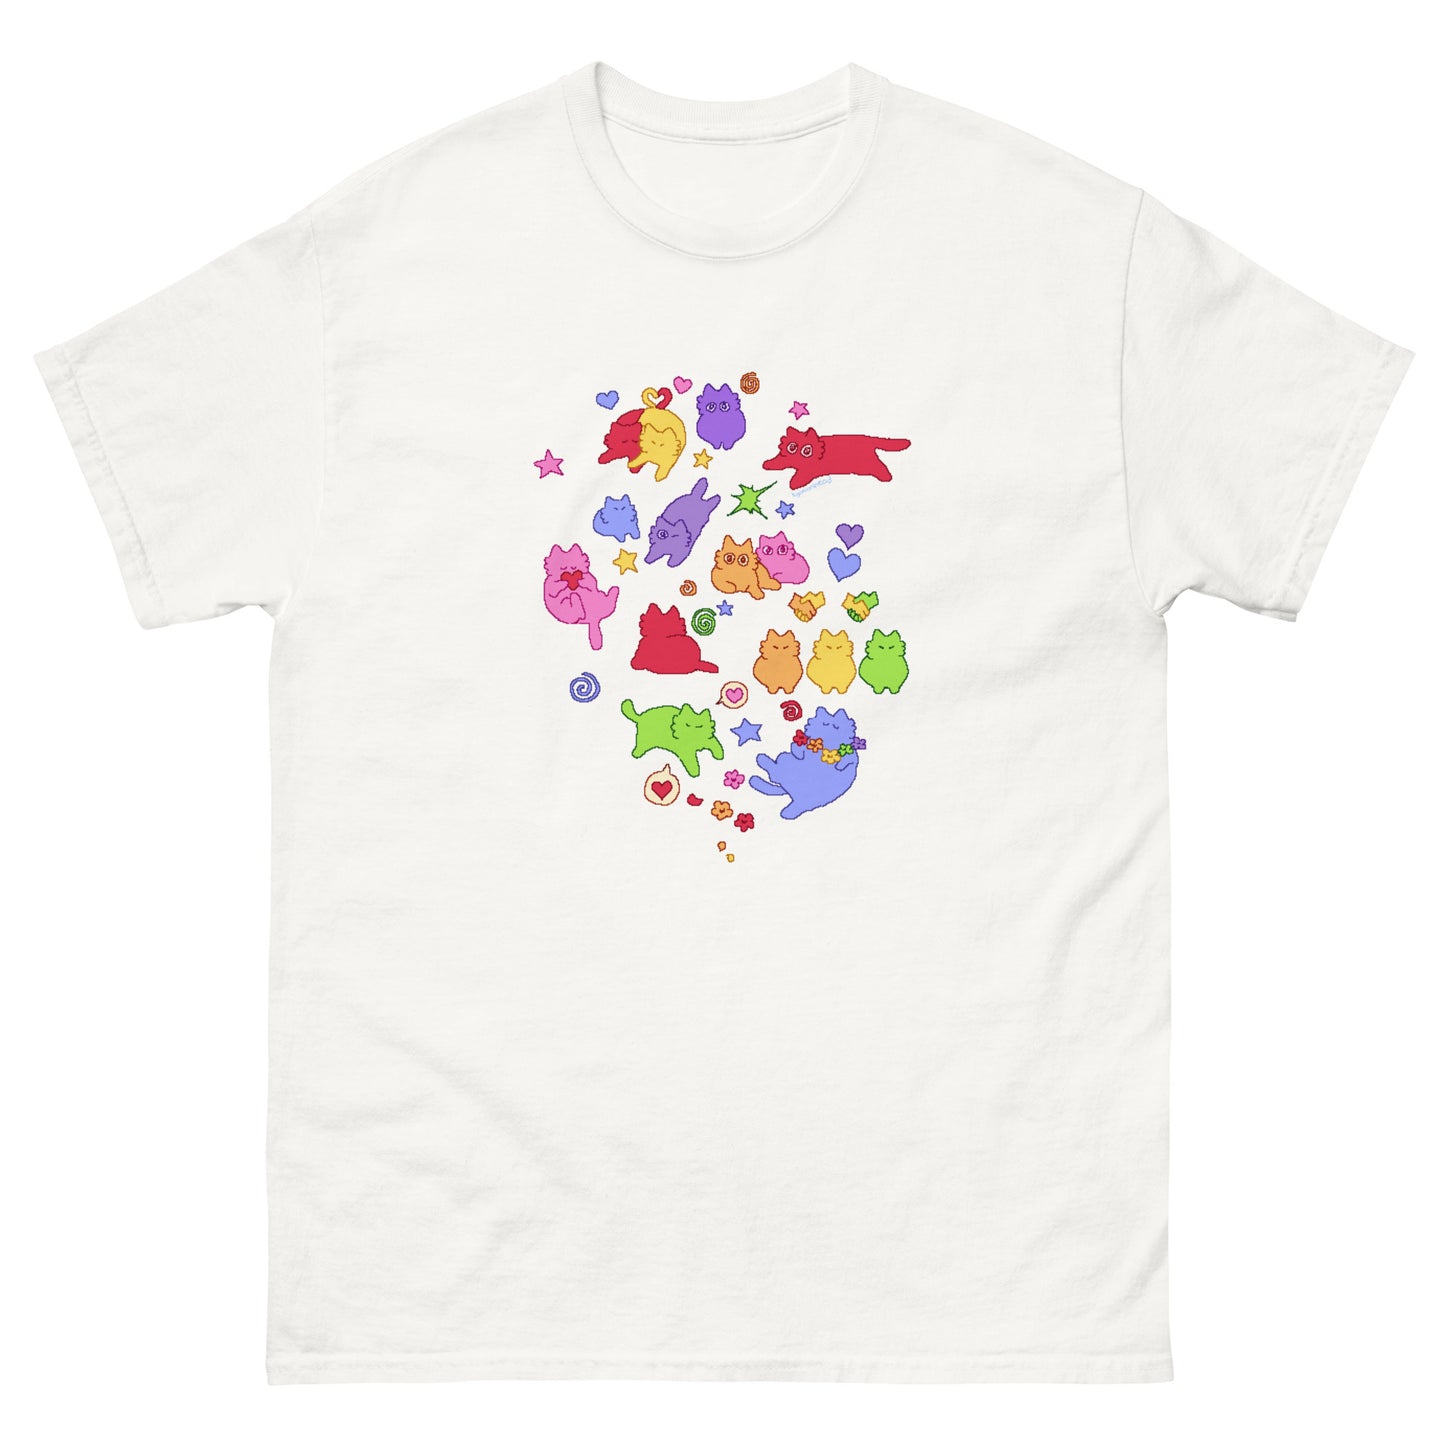 Love Exists Everywhere T-Shirt